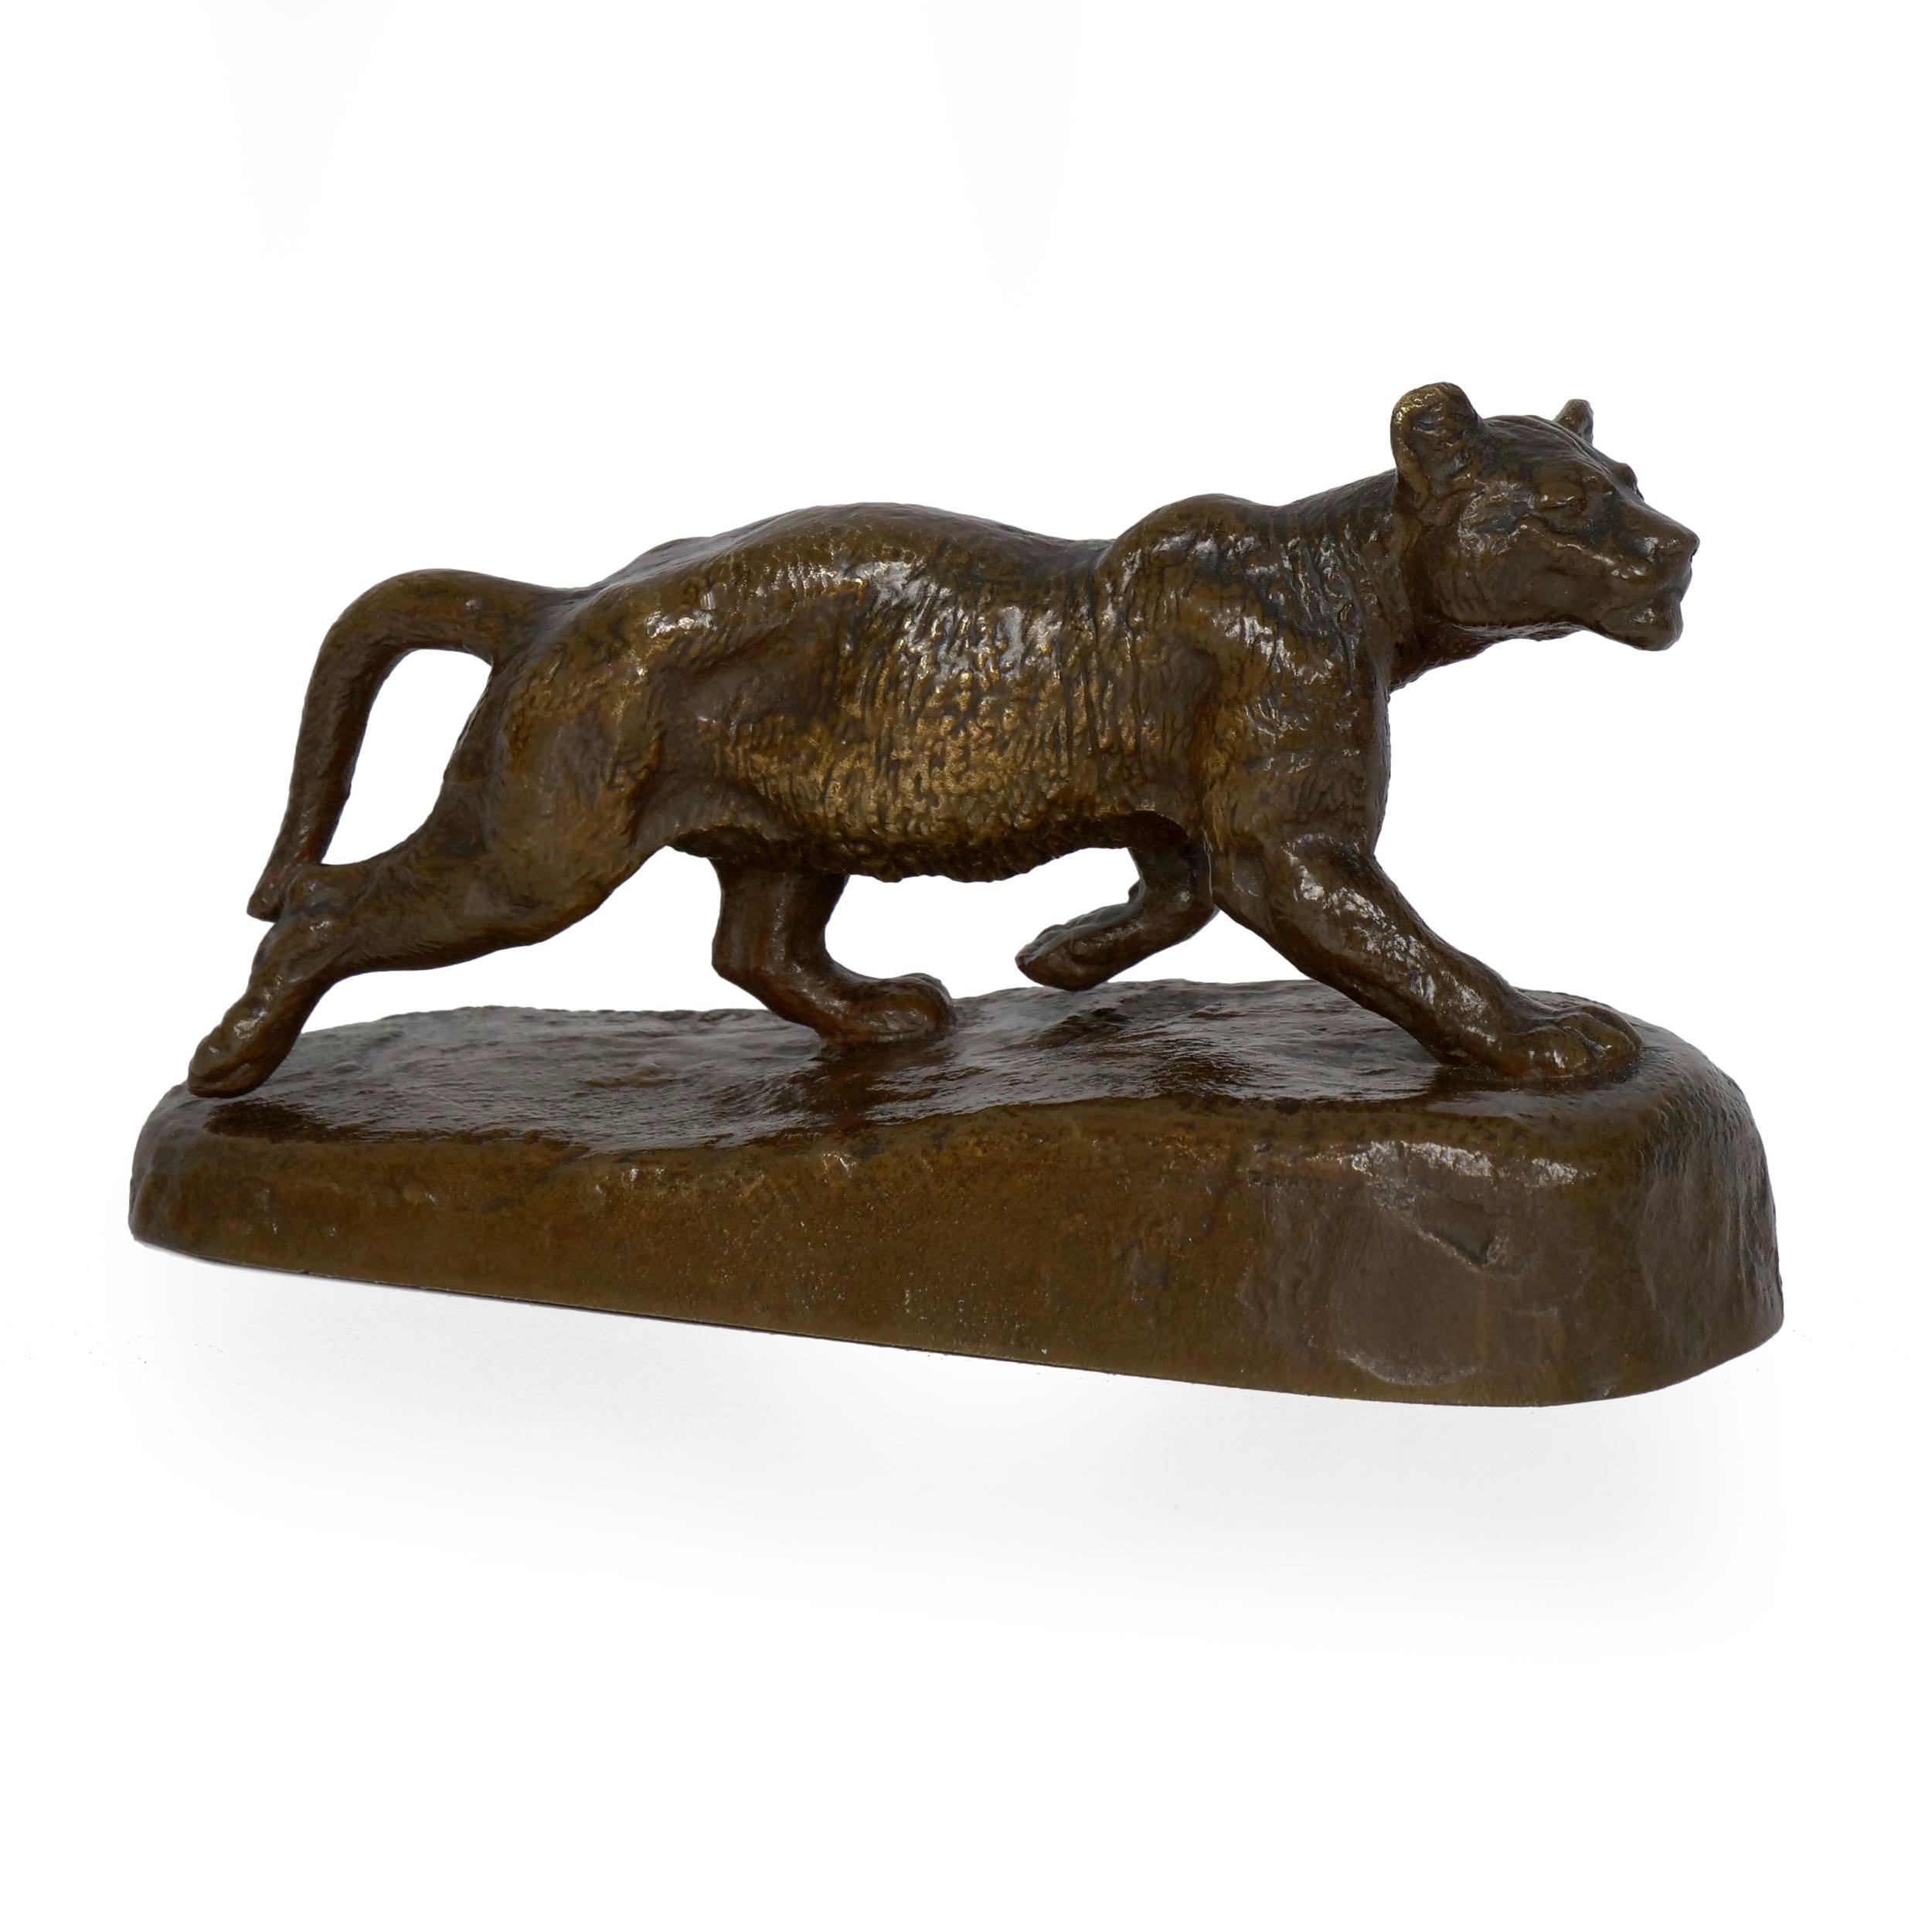 Romantic “Lion Cub” French Antique Bronze Sculpture by Isidore Bonheur and Peyrol